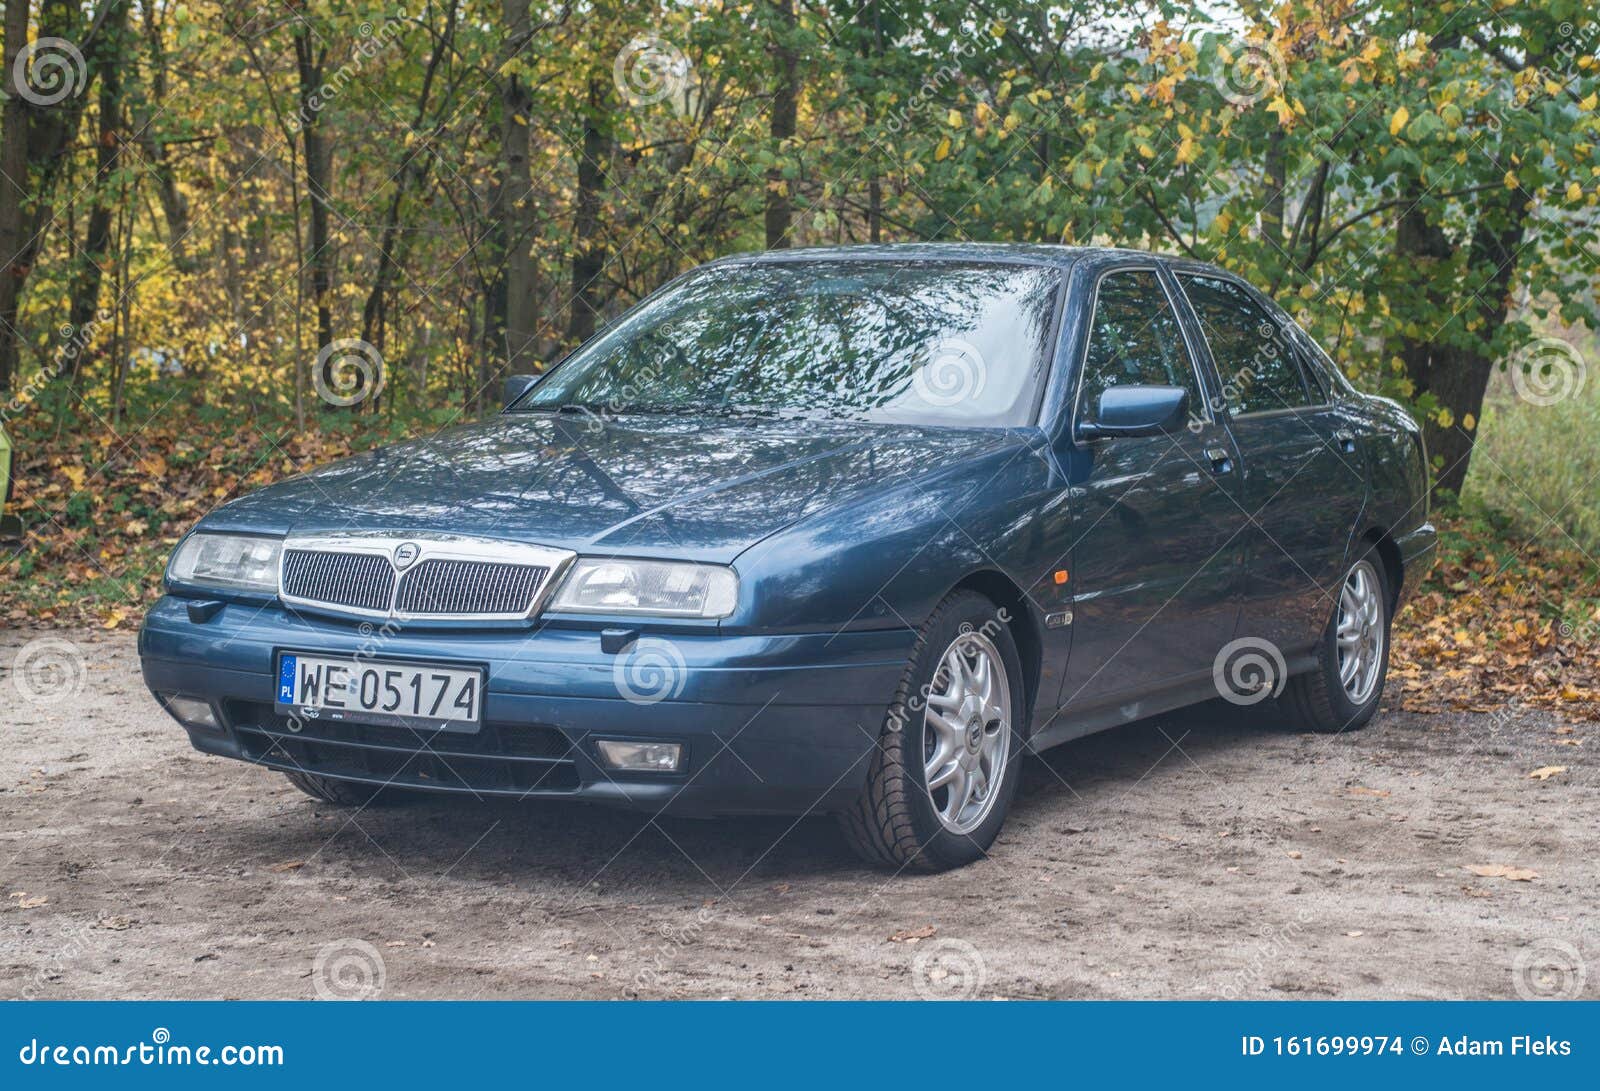 Classic Blue Lancia Kappa Parked Under Autumn Tree Editorial Stock Image -  Image of front, collection: 161699974